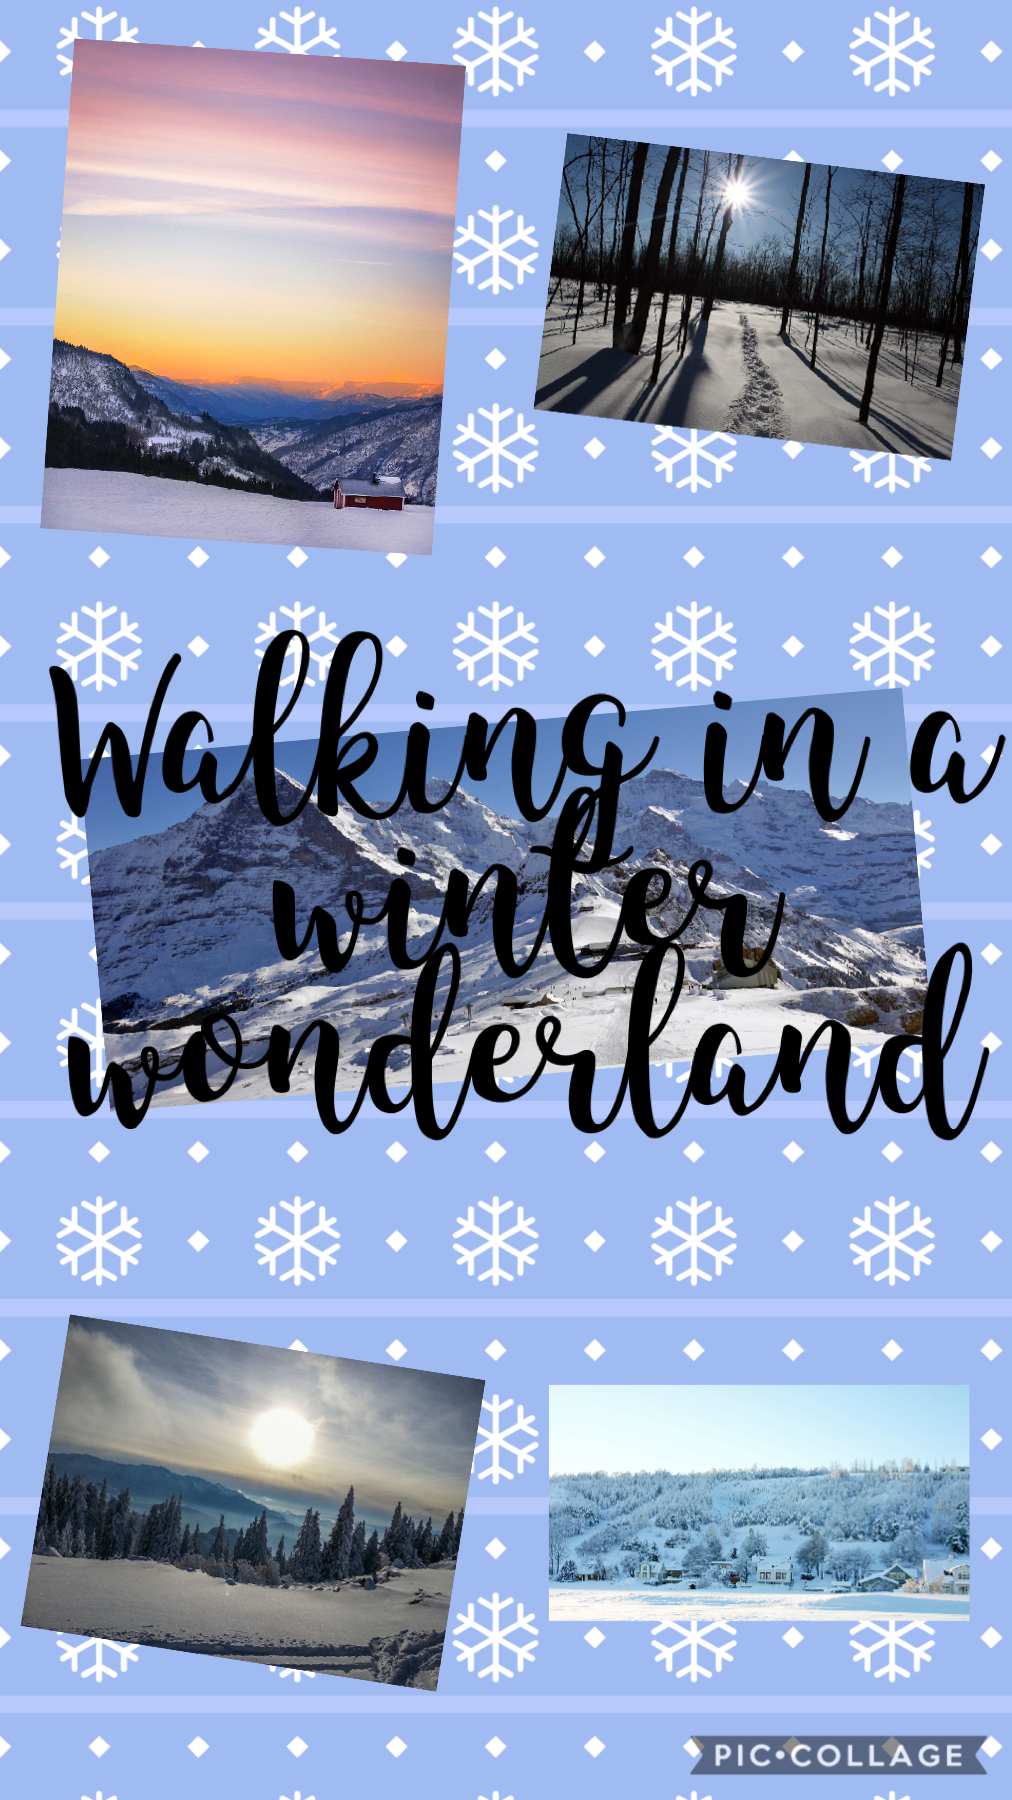 Walking in a winter wonderland!! What is your favorite part of winter ❄️ I love to walking around in the snow and decorate my Christmas trees!!